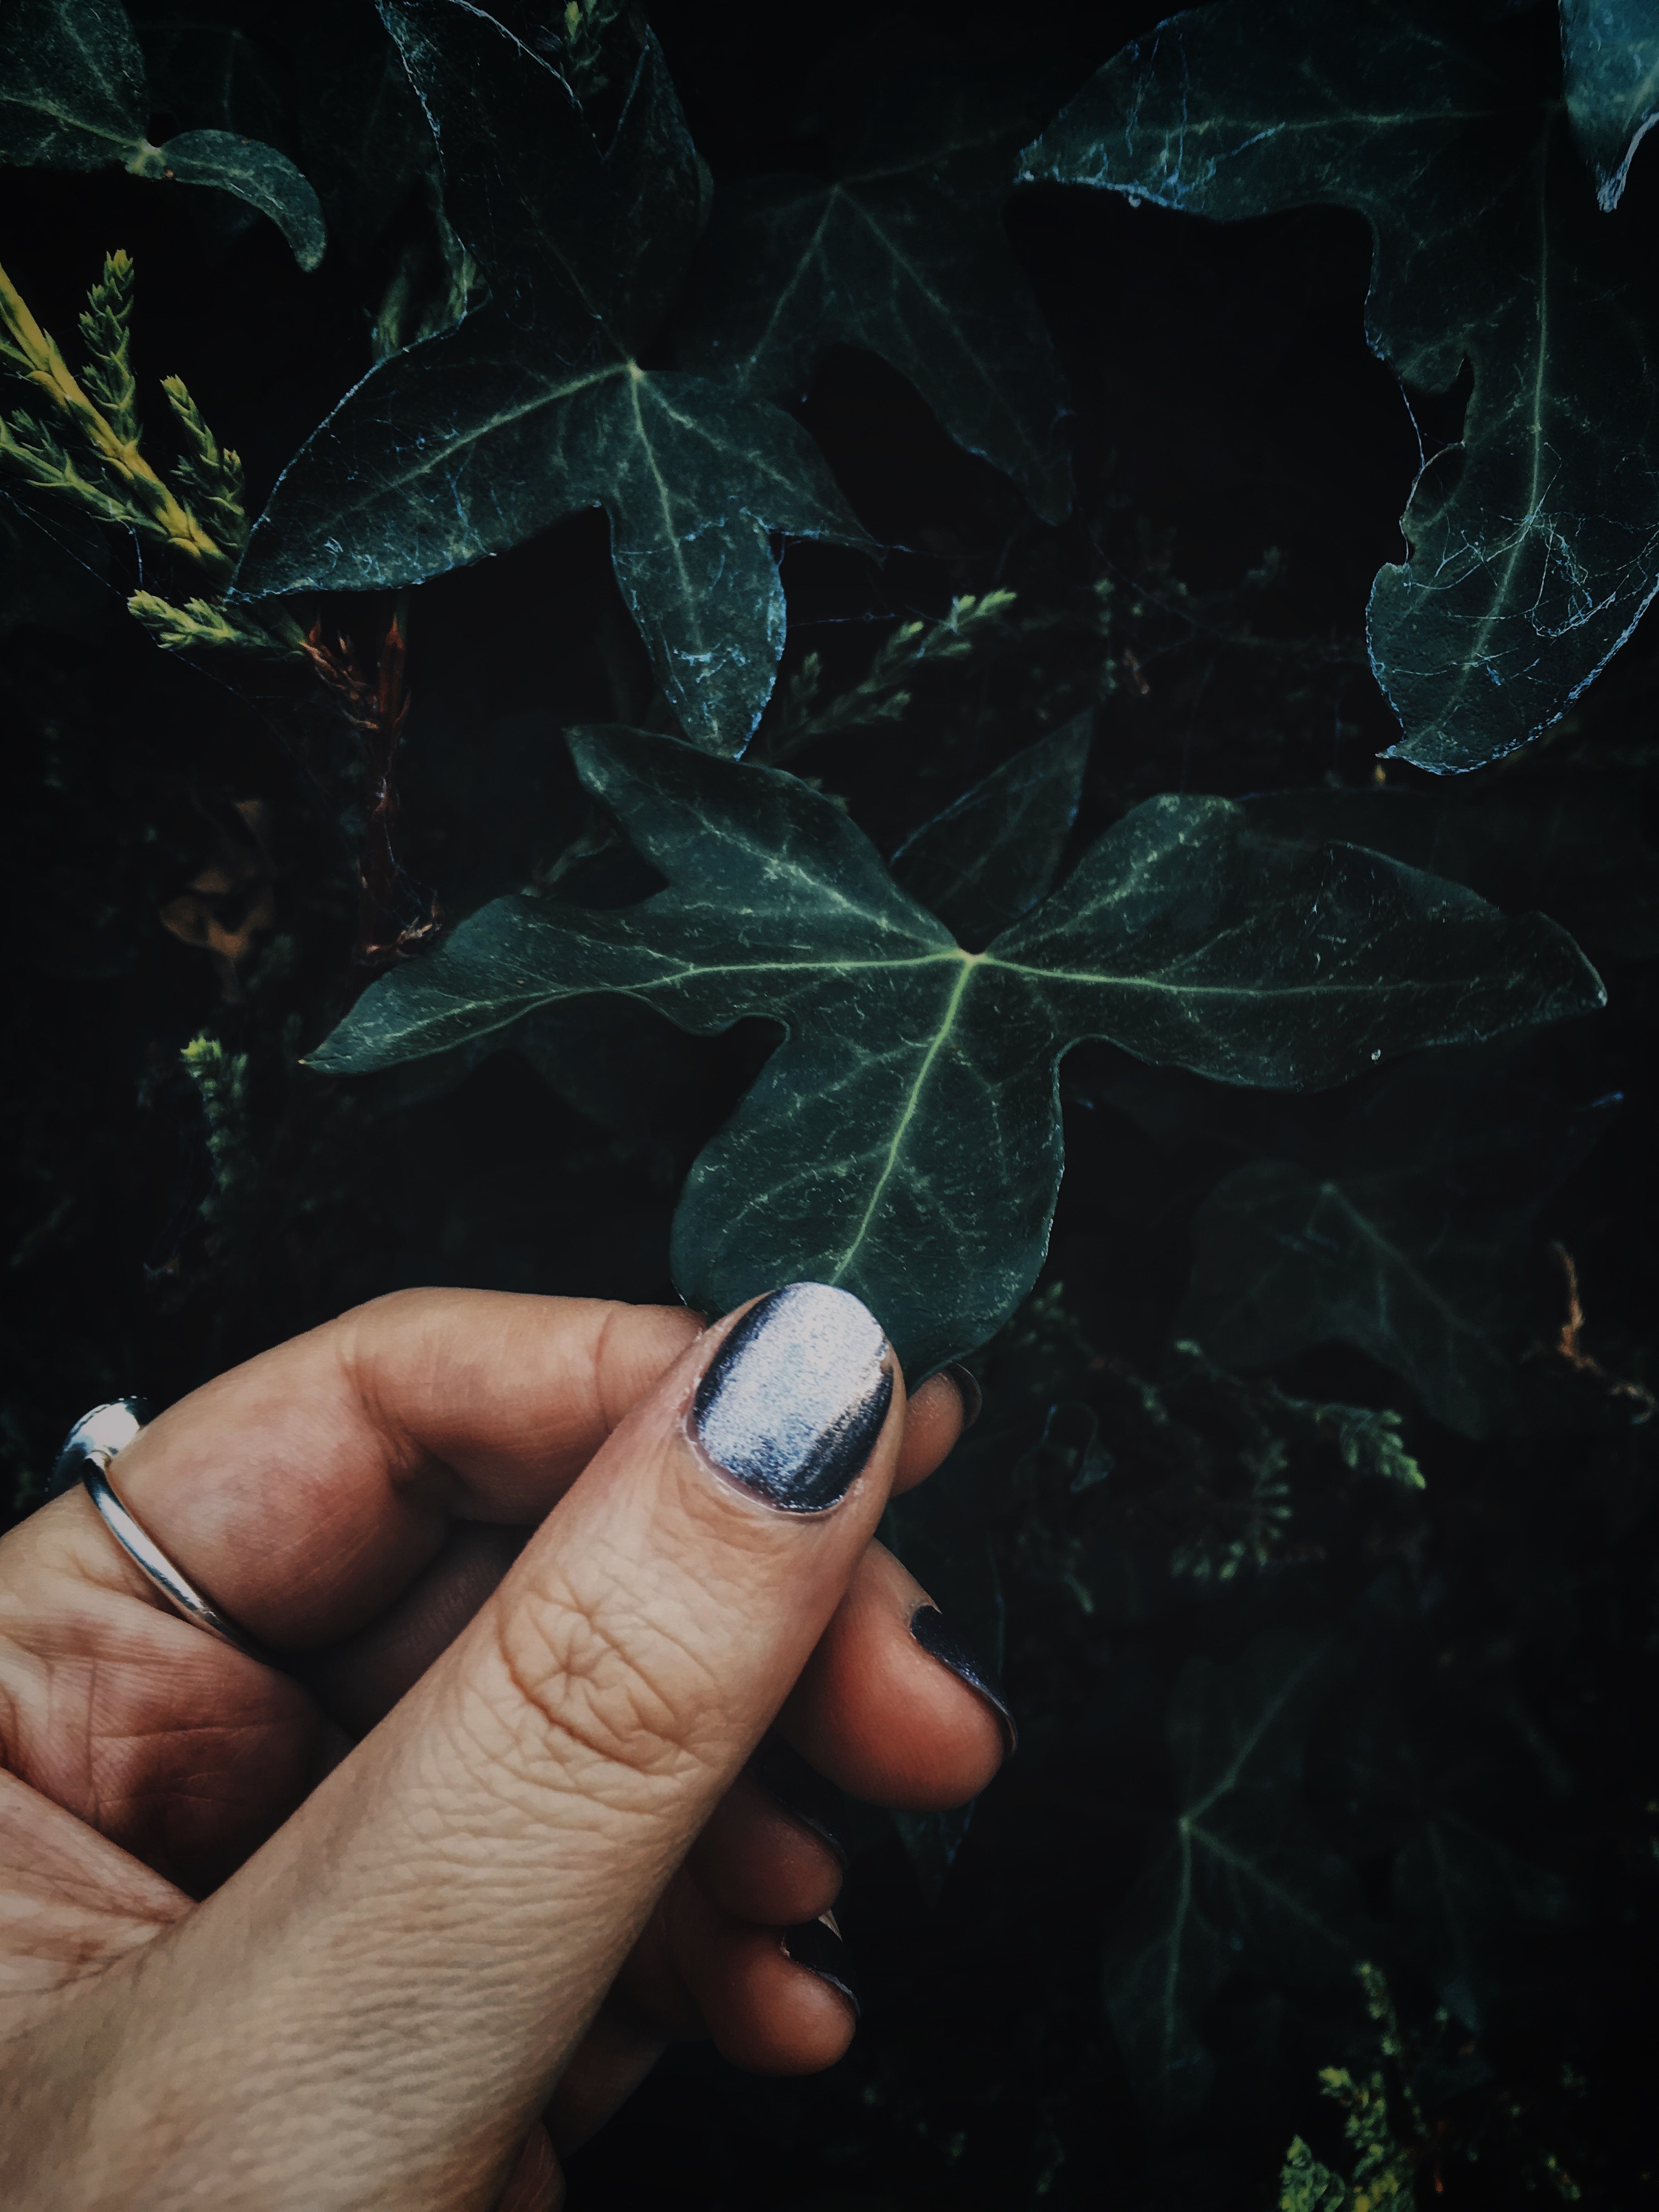 A photo of a woman touching a leaf | Source: Pexels